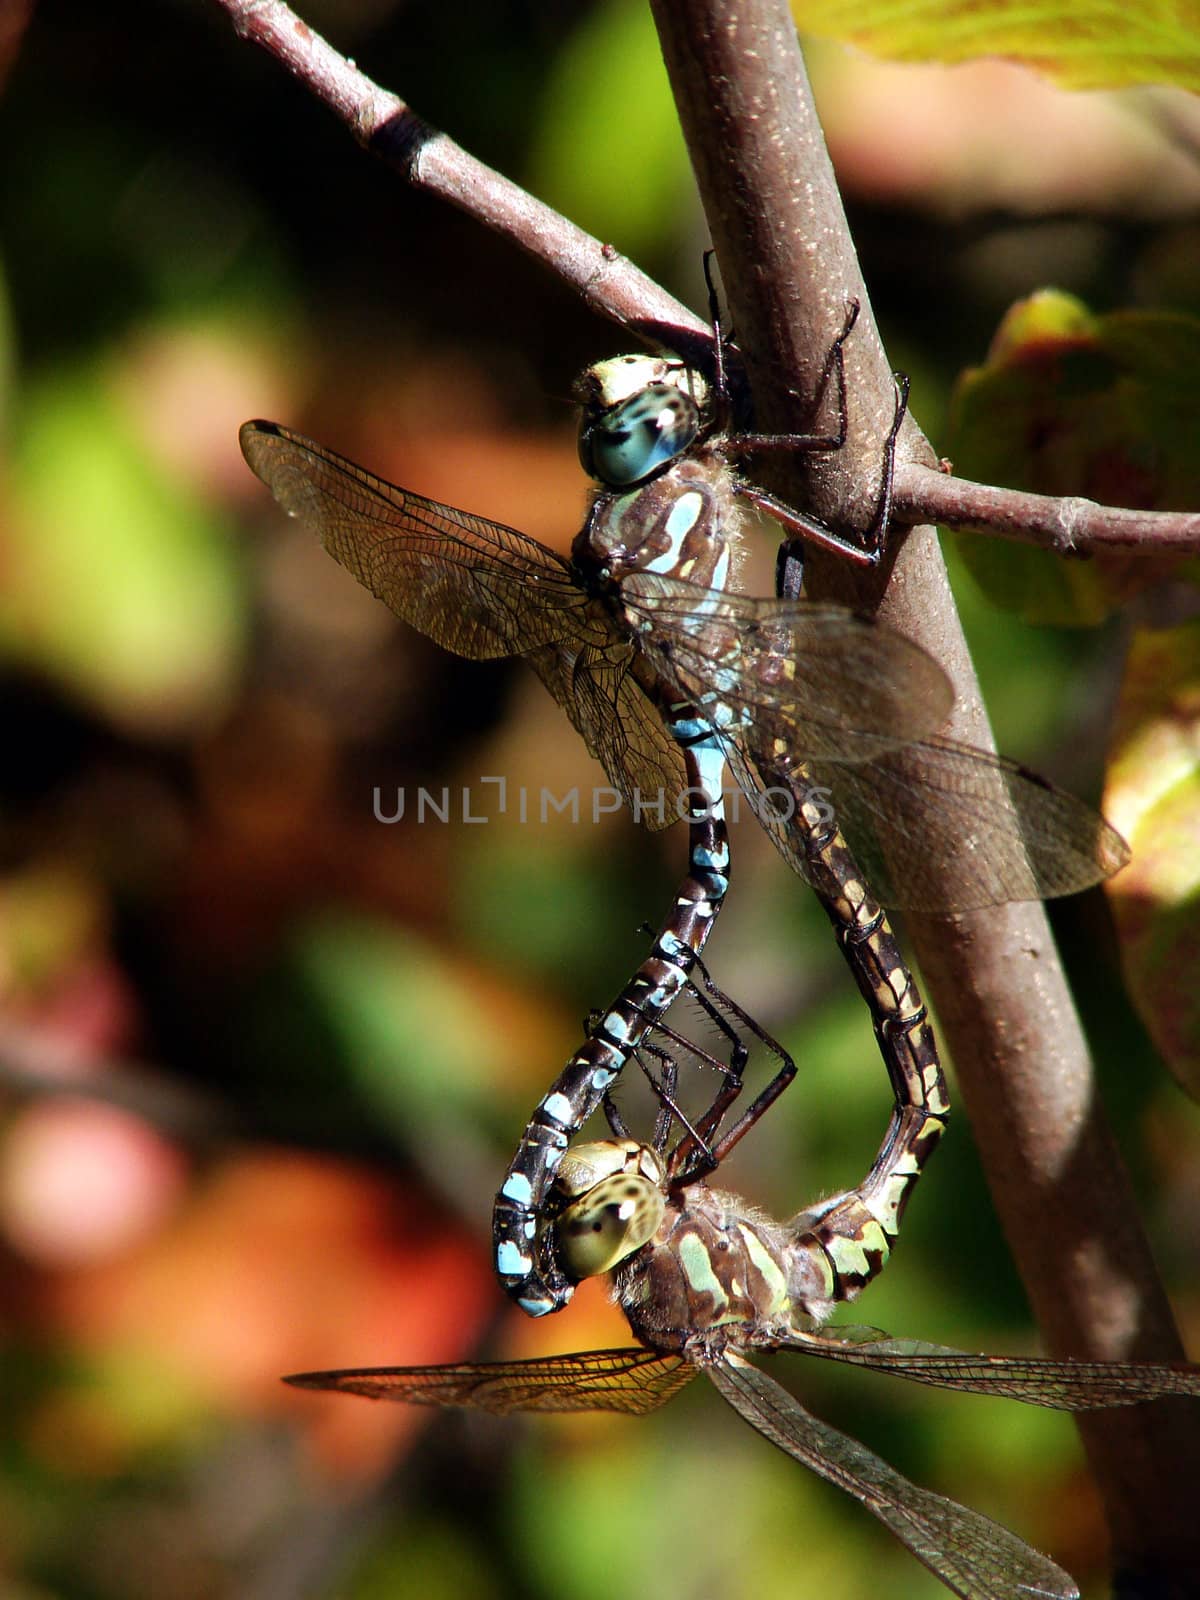 Dragonfly mating by Thorvis